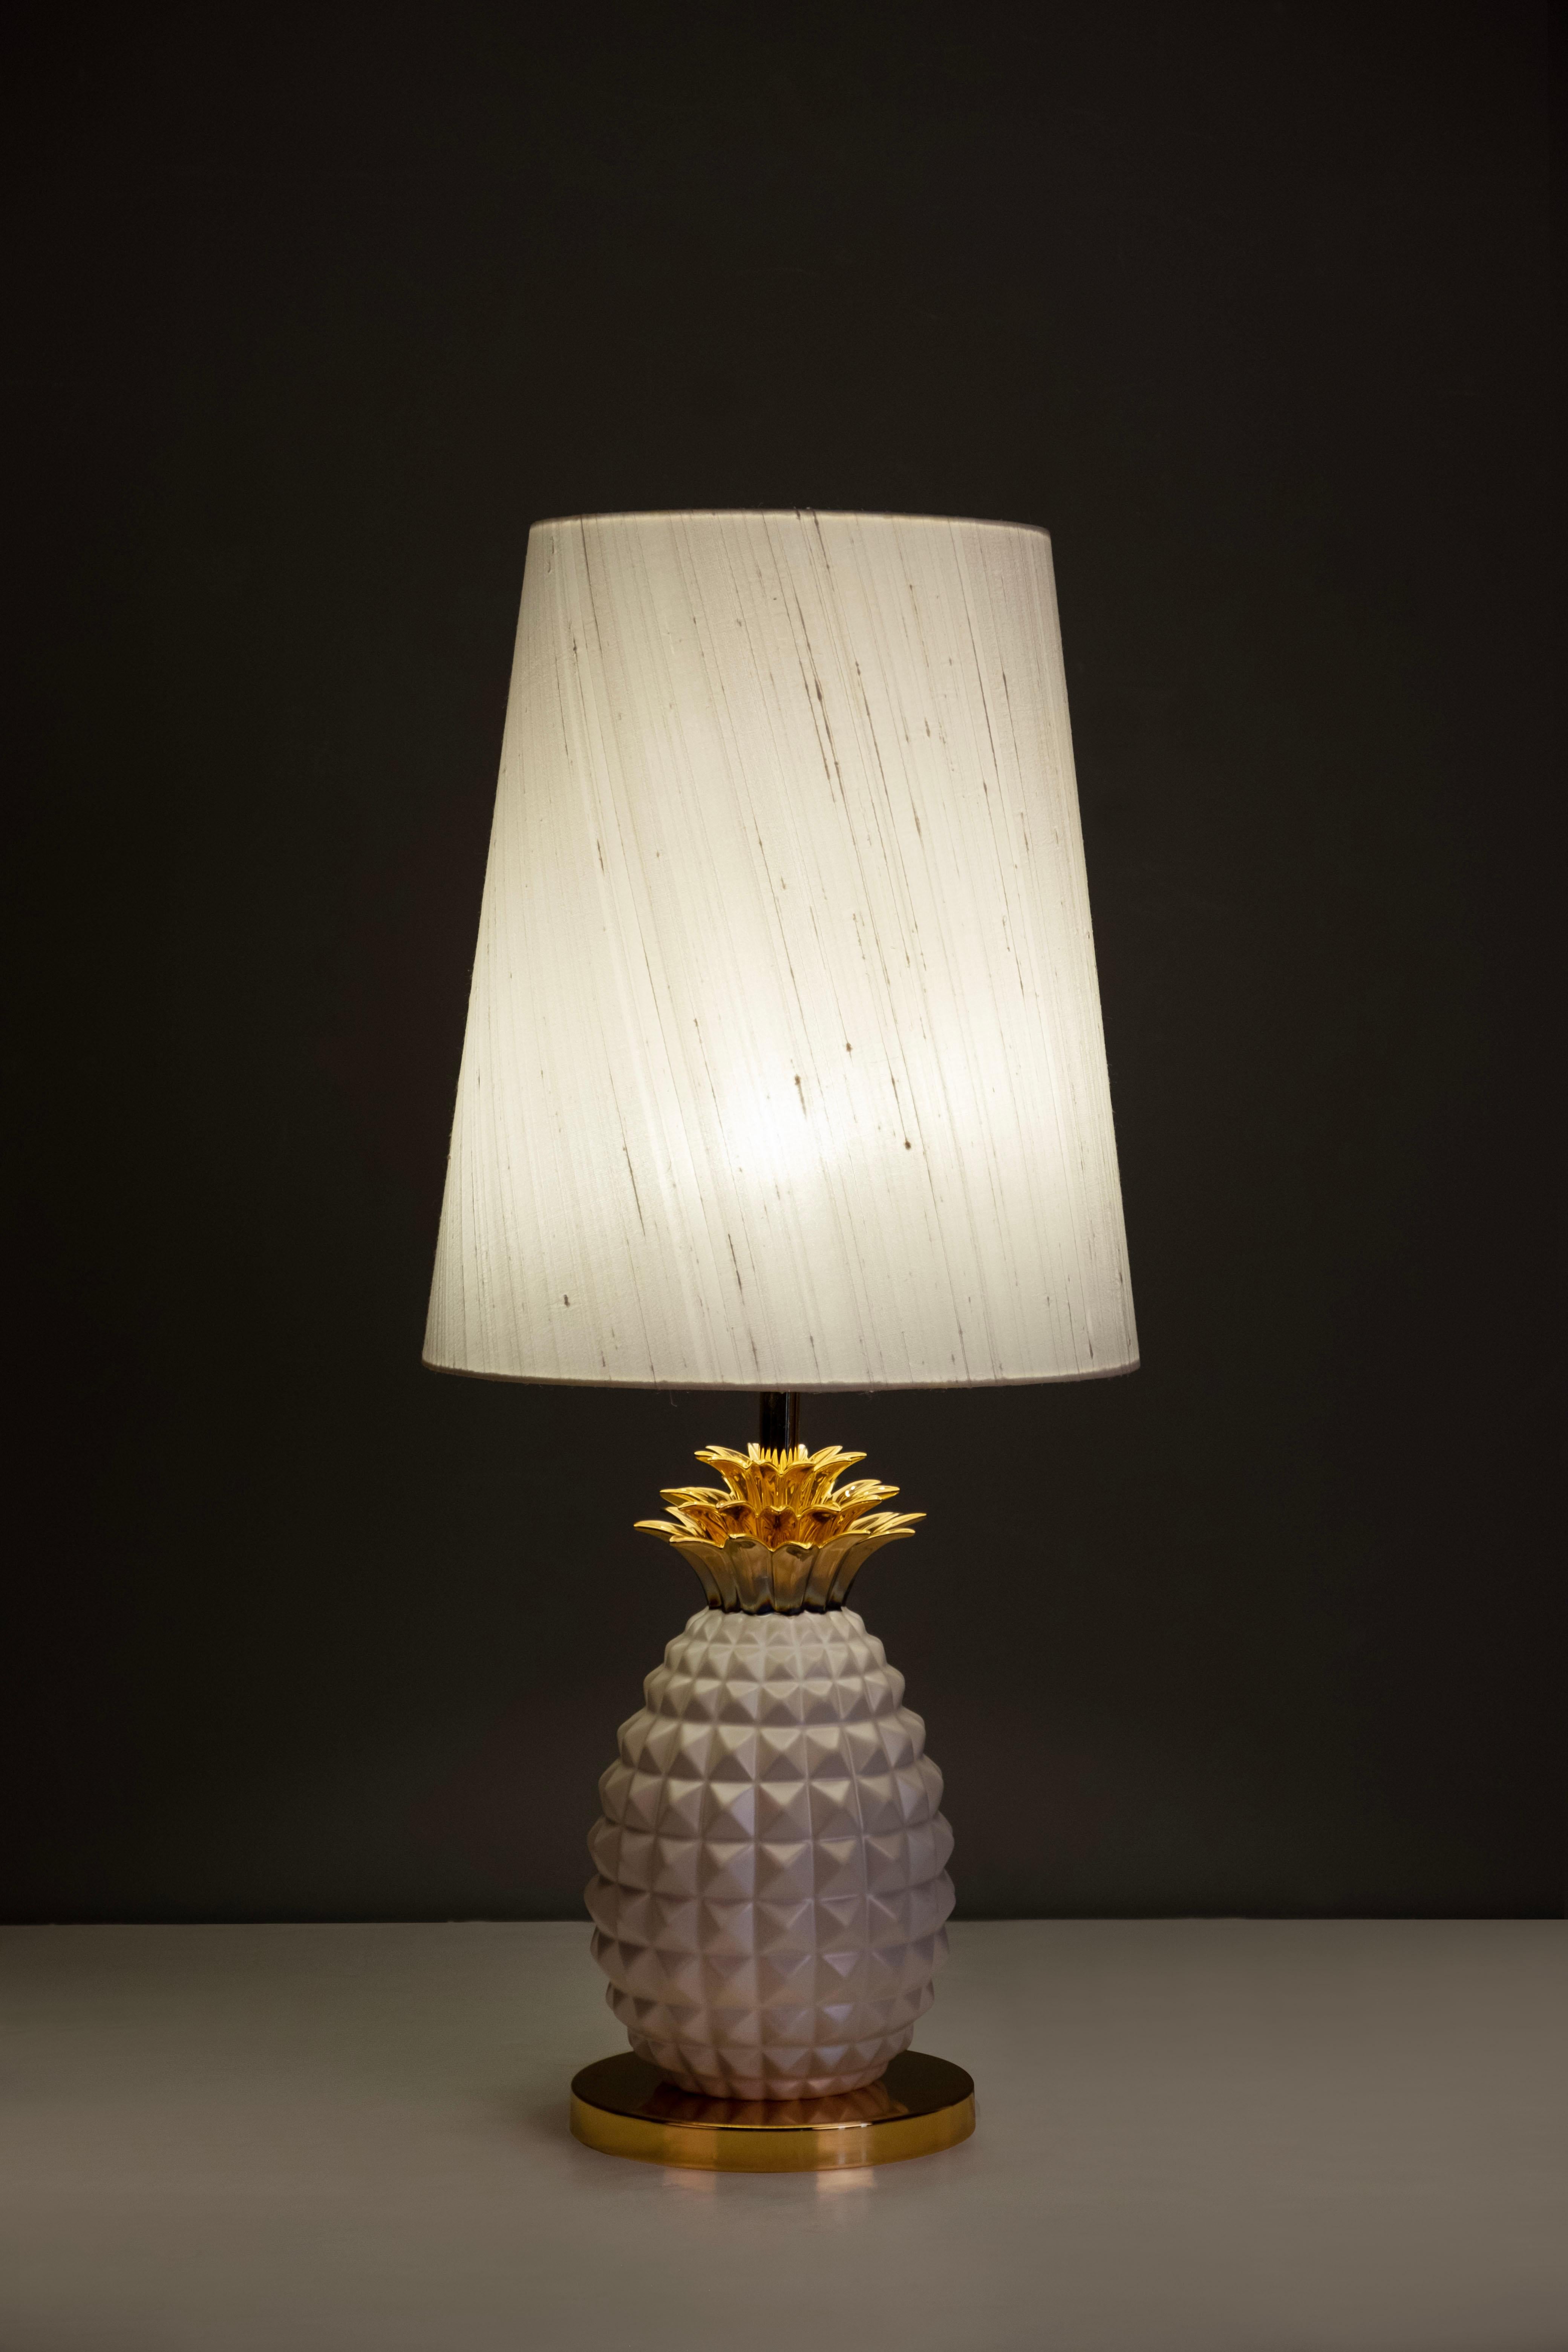 Modern Set of 2 Table Lamps, Morais Table Lamp, Cream Lampshade, Handmade in Portugal For Sale